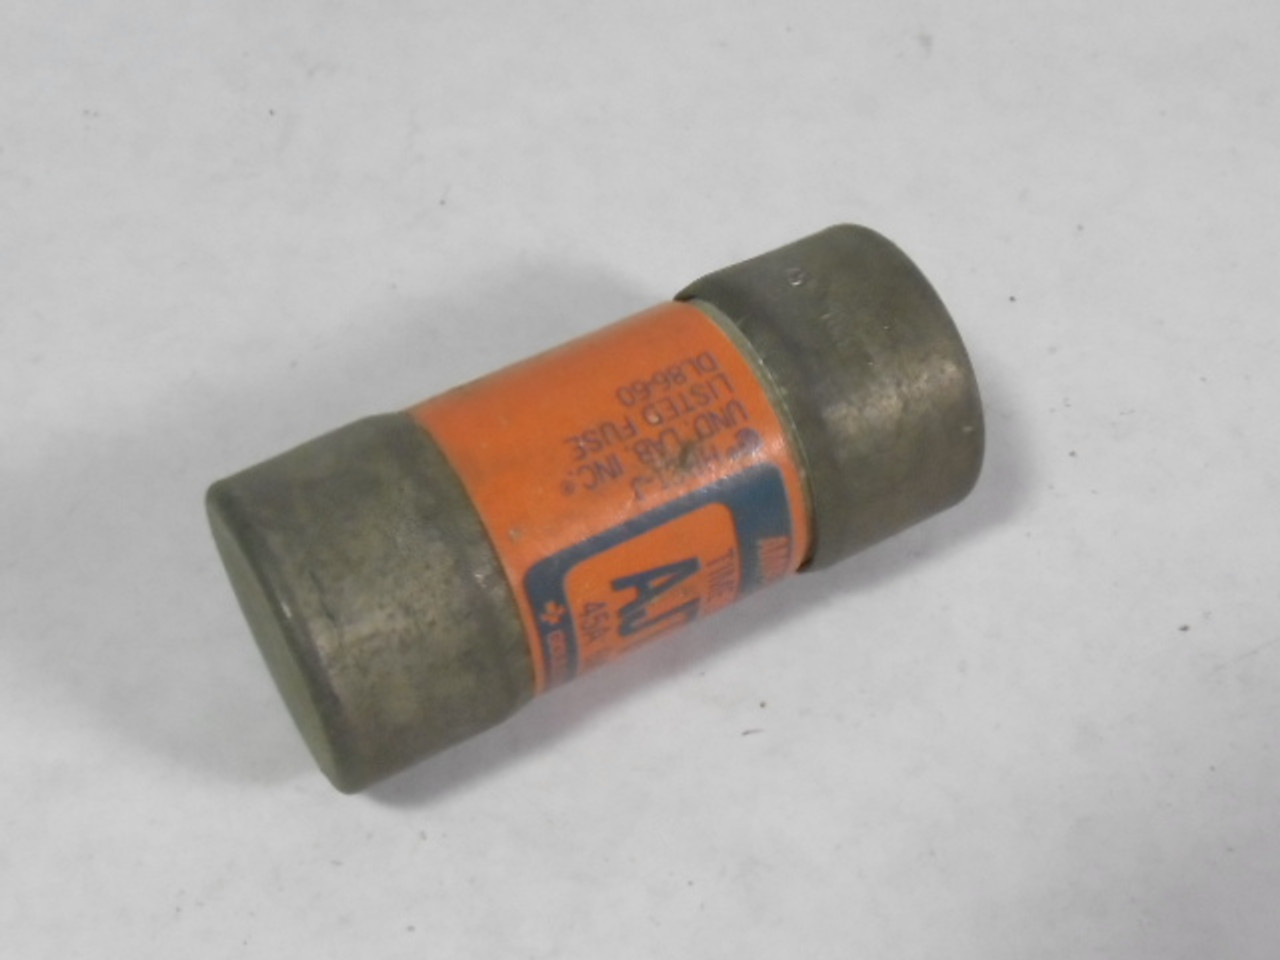 Gould Shawmut AJT45 Time Delay Fuse 45A 600V USED